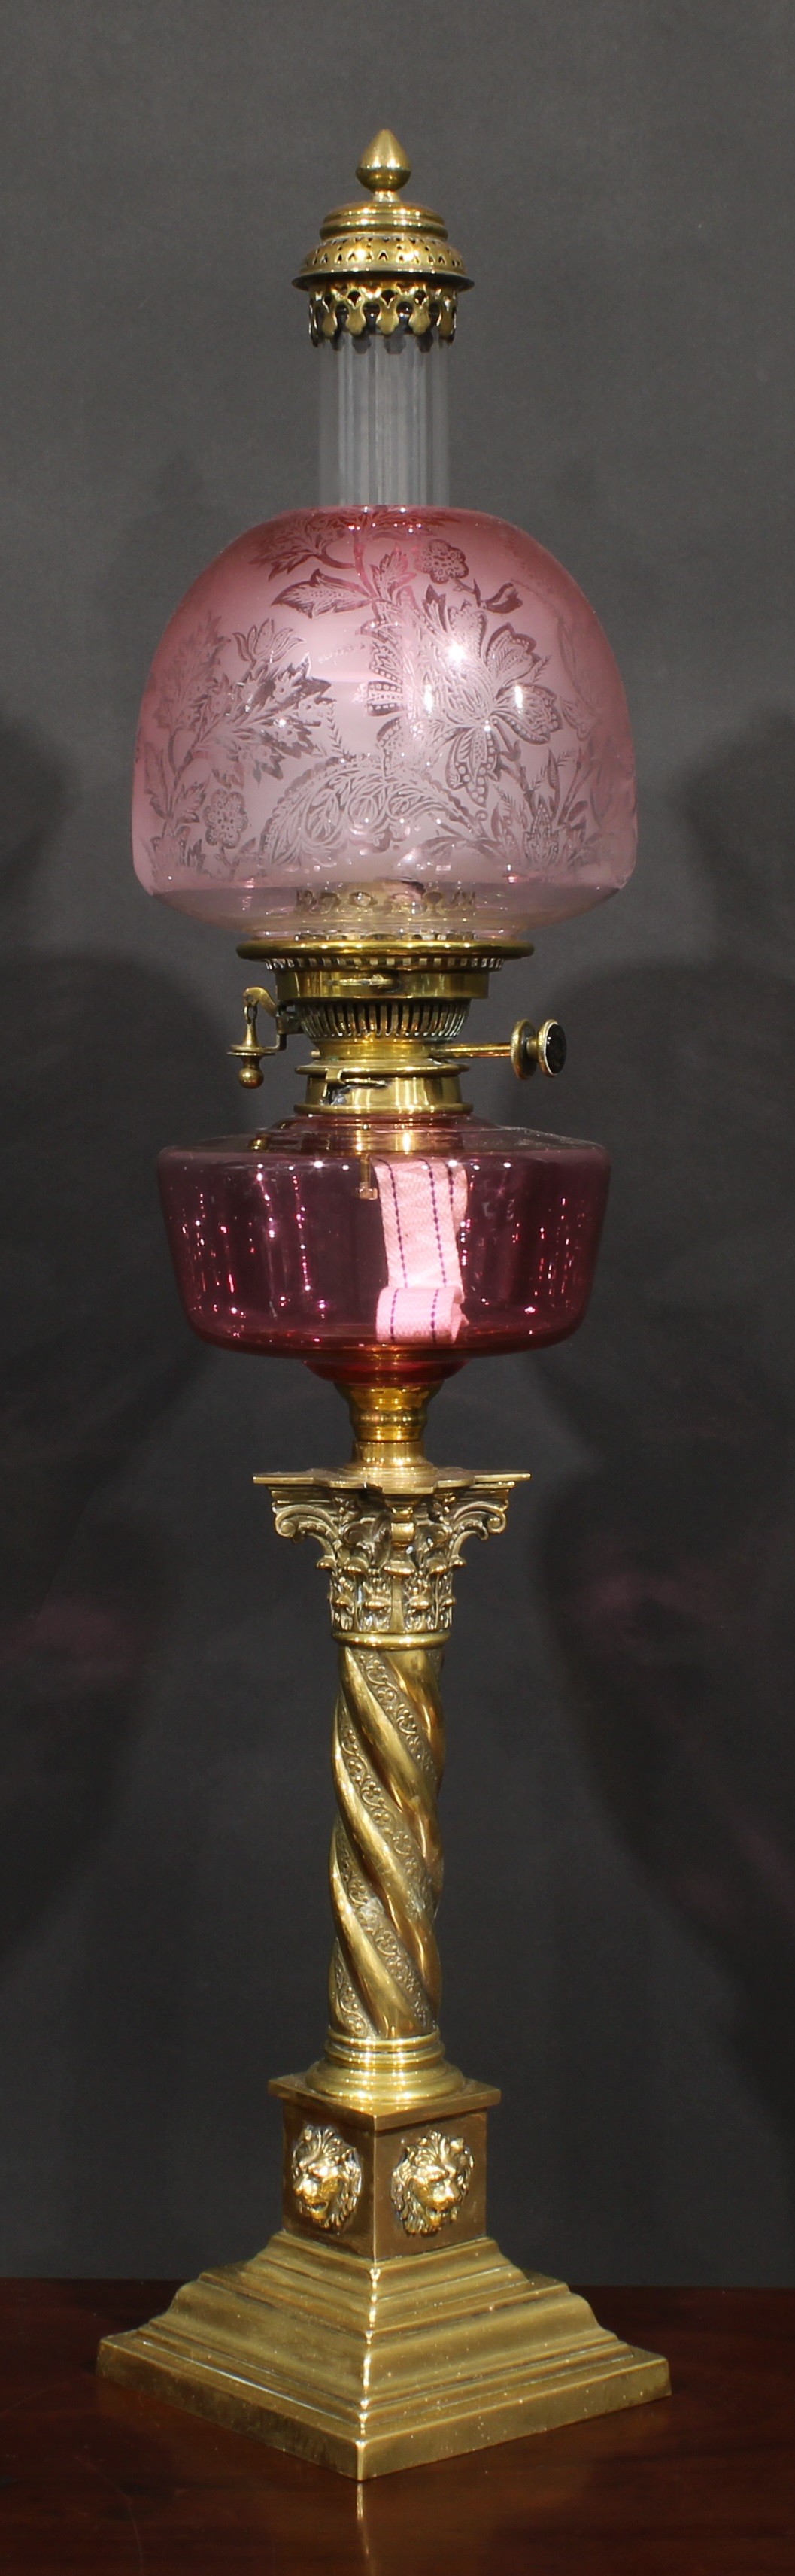 A 19th century brass oil lamp, Maple London, cranberry glass font, Hinks Patent twin burner, ovoid - Image 2 of 2